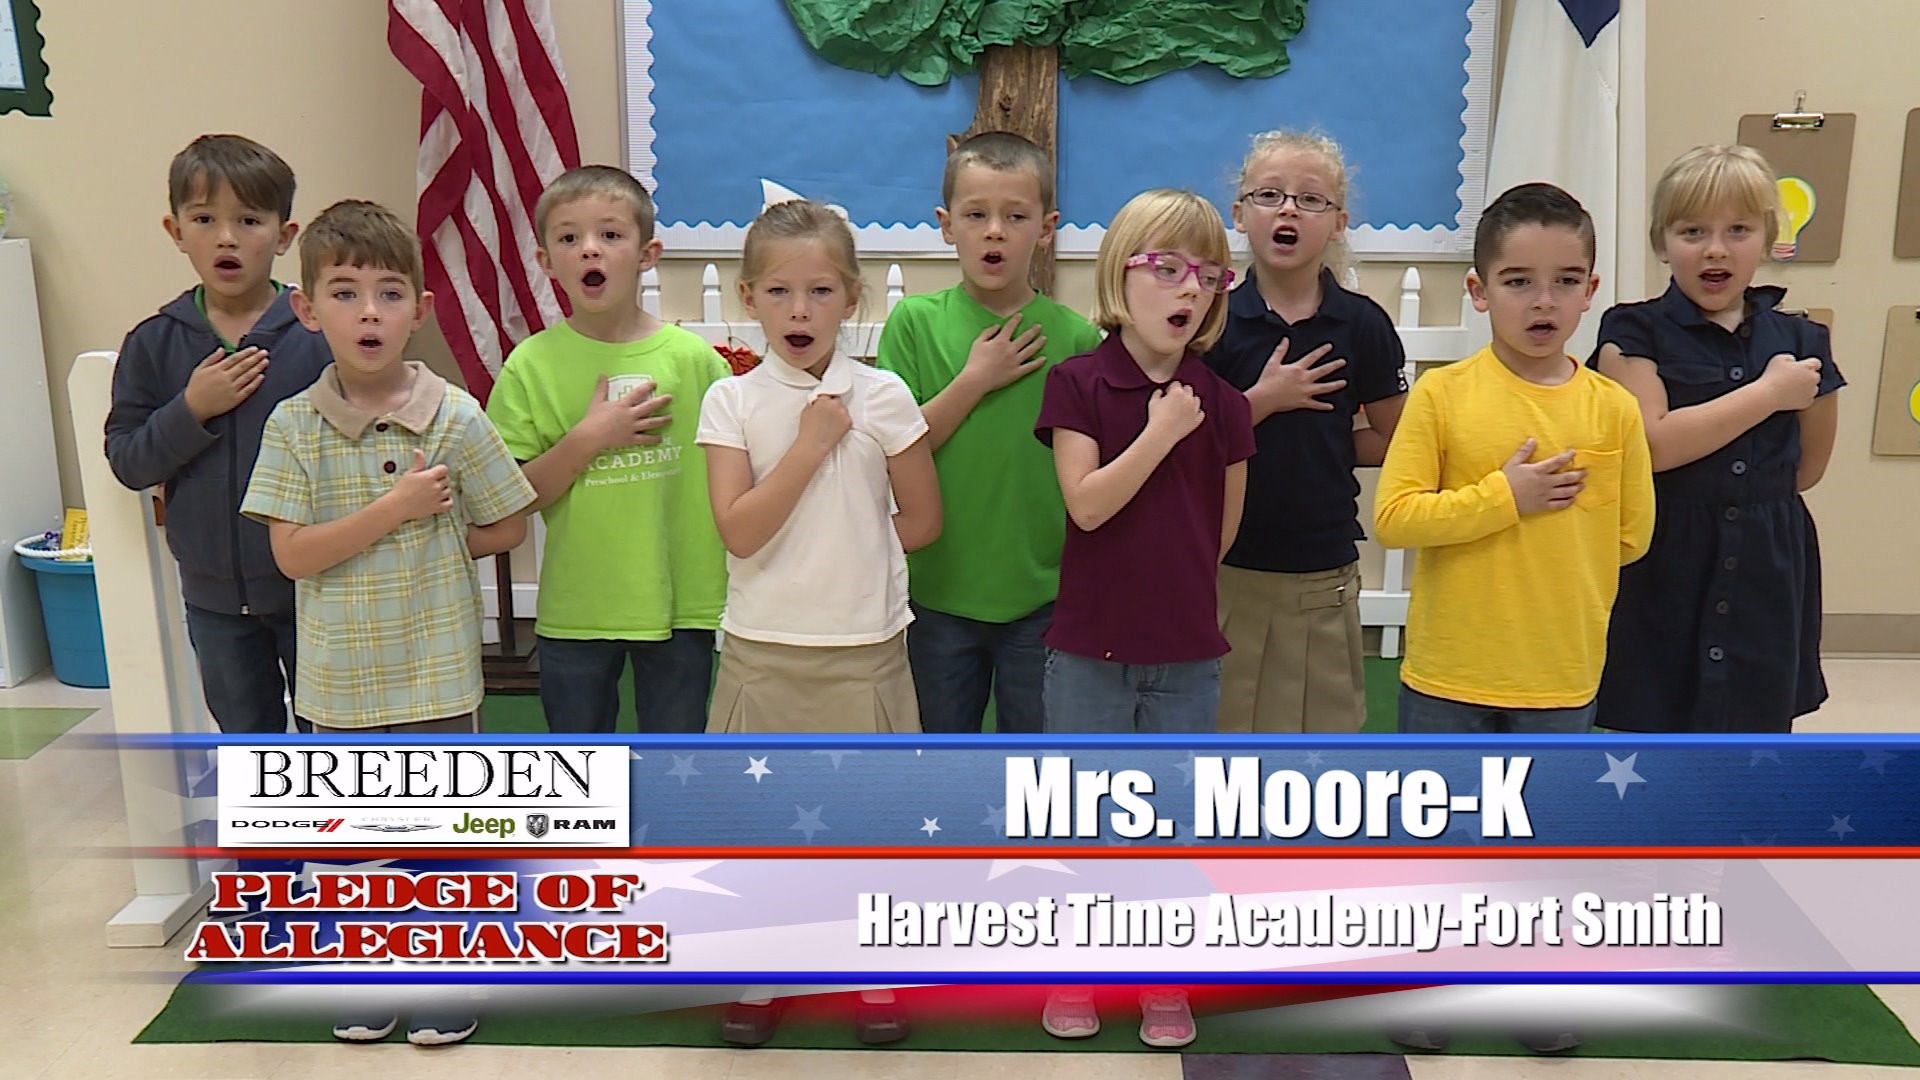 Mrs. Moore  K Harvest Time Academy, Fort Smith